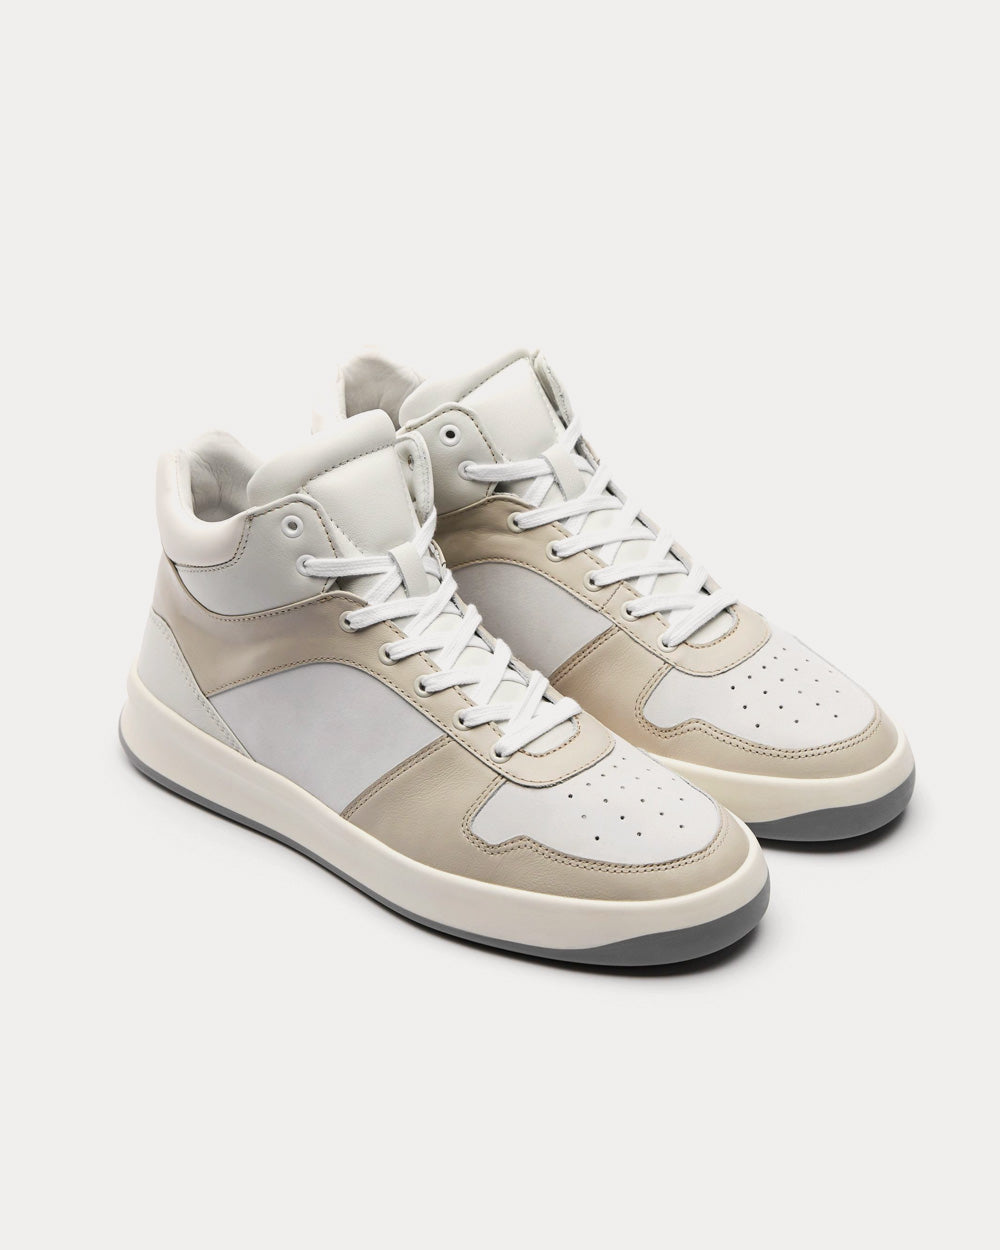 Vor - 5B Taupeweiss Off-White High Top Sneakers